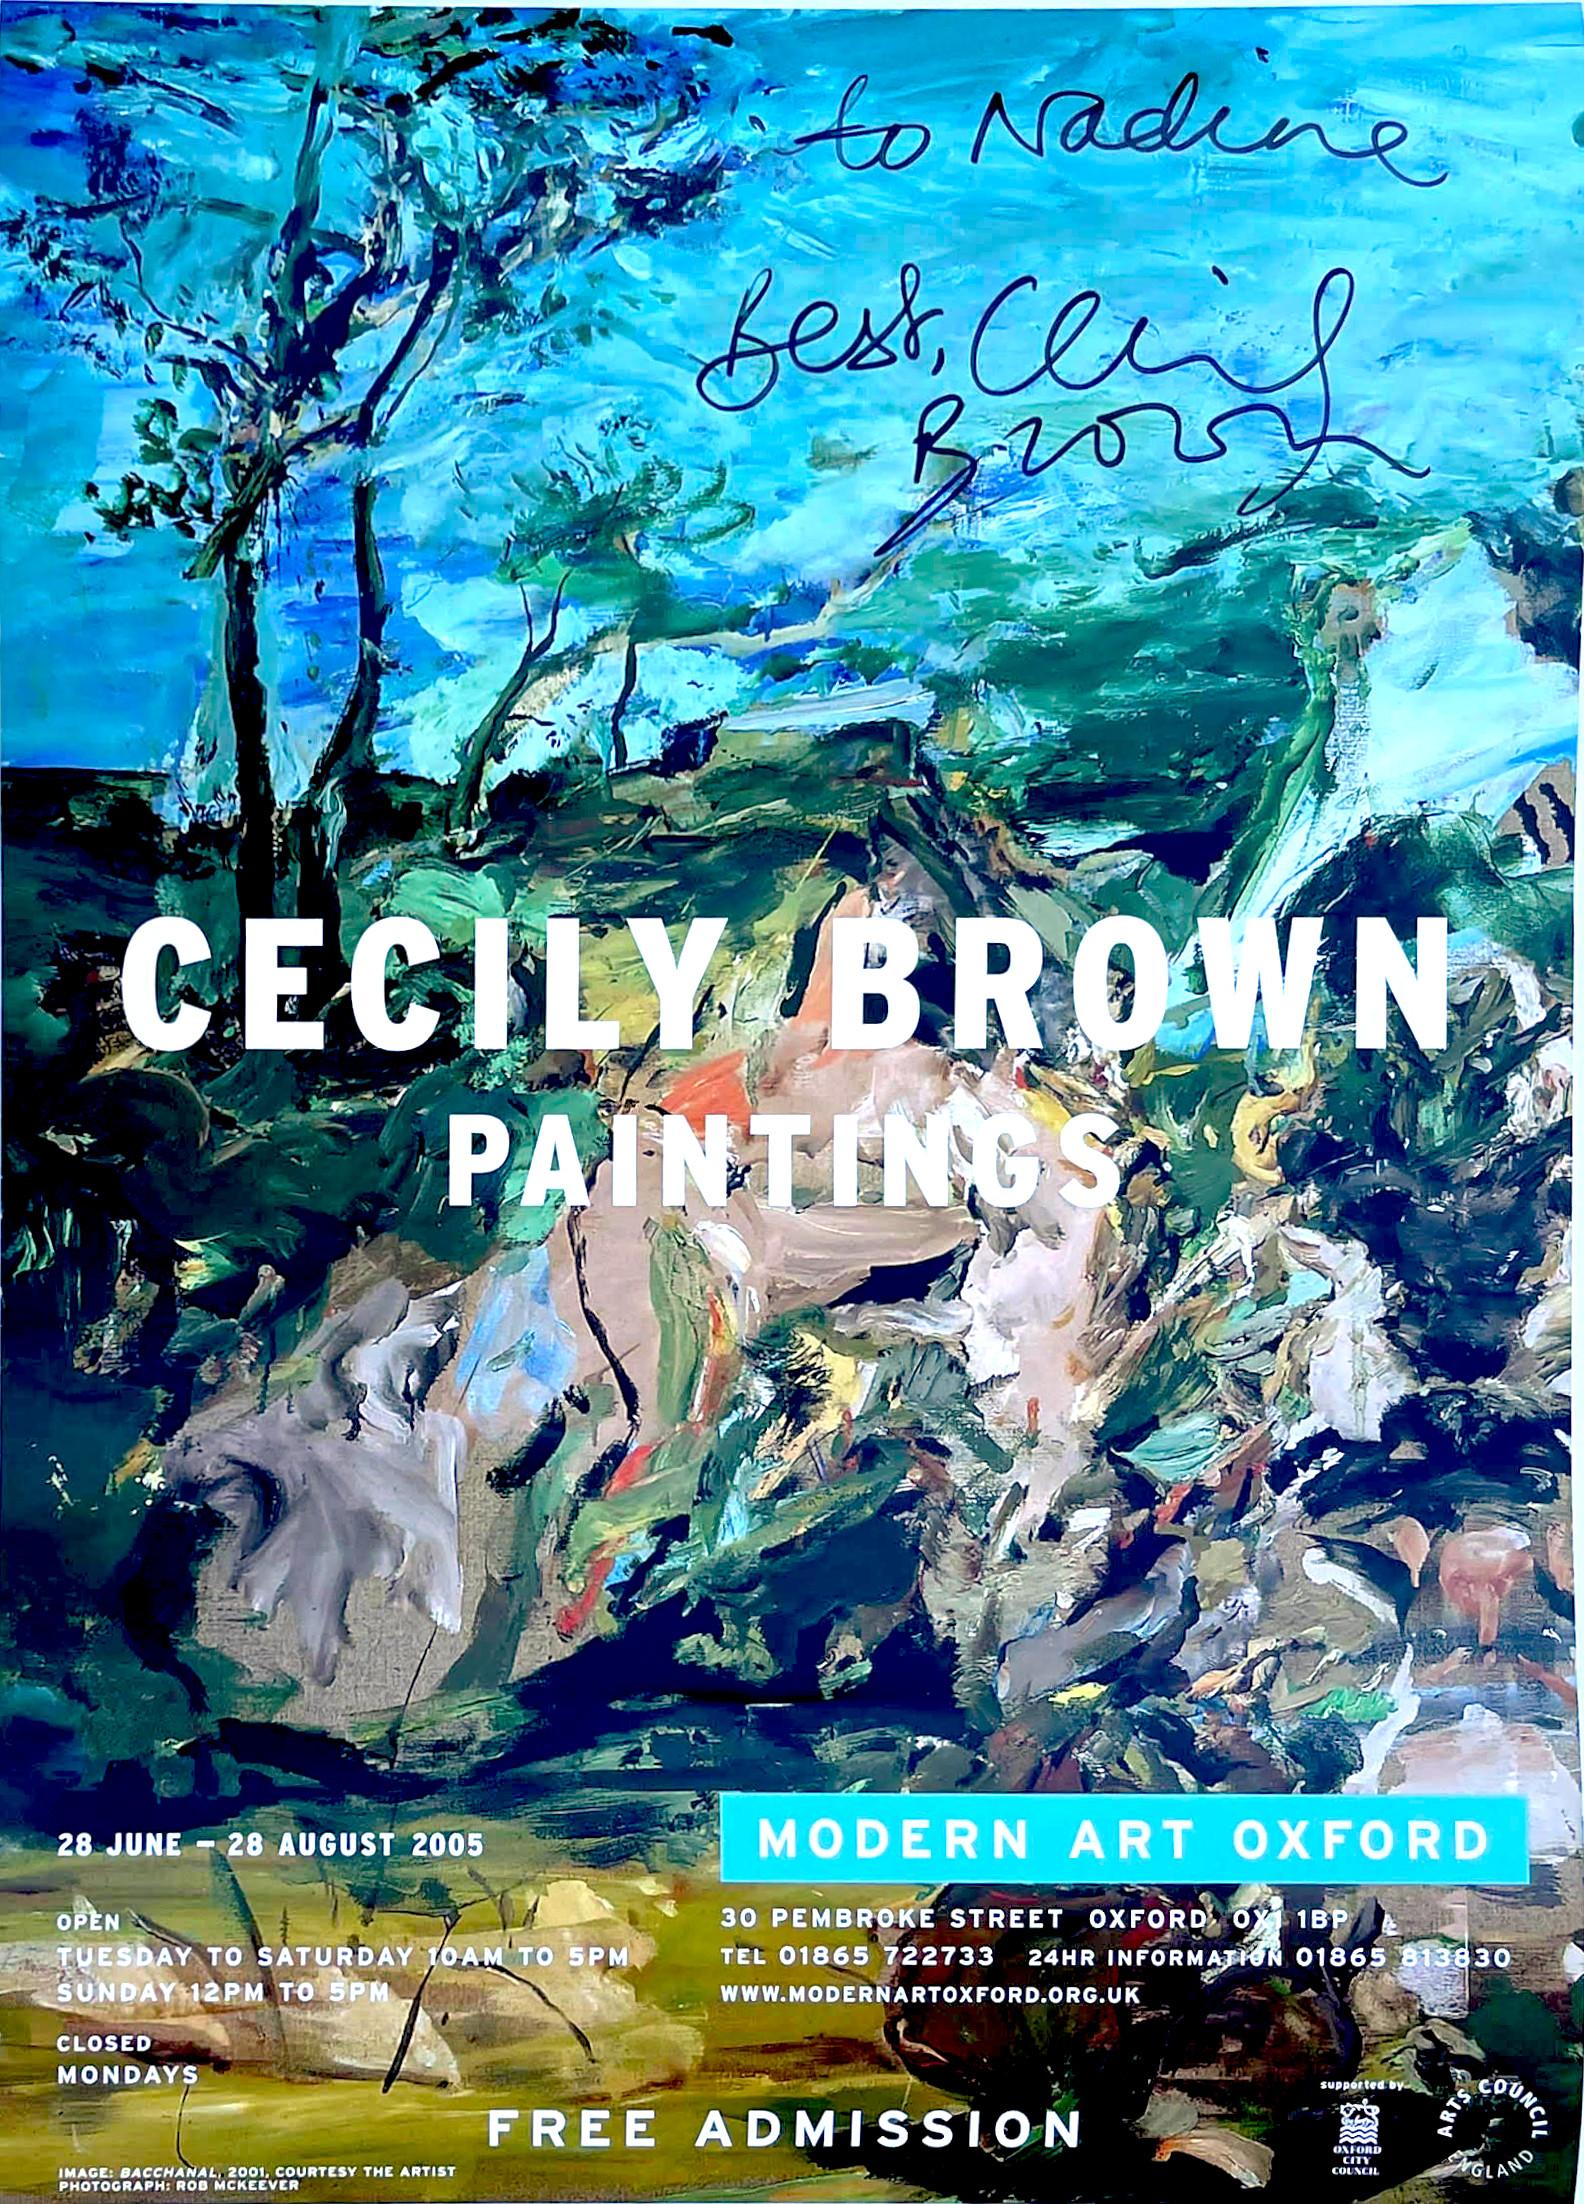 Cecily Brown Paintings at Modern Art Oxford (hand signed and inscribed), 2005
Offset lithograph poster (signed and inscribed to Nadine)
Hand signed and inscribed to Nadine by Cecily Brown on the front
16 1/2 × 11 1/2 inches
Unframed
This poster was